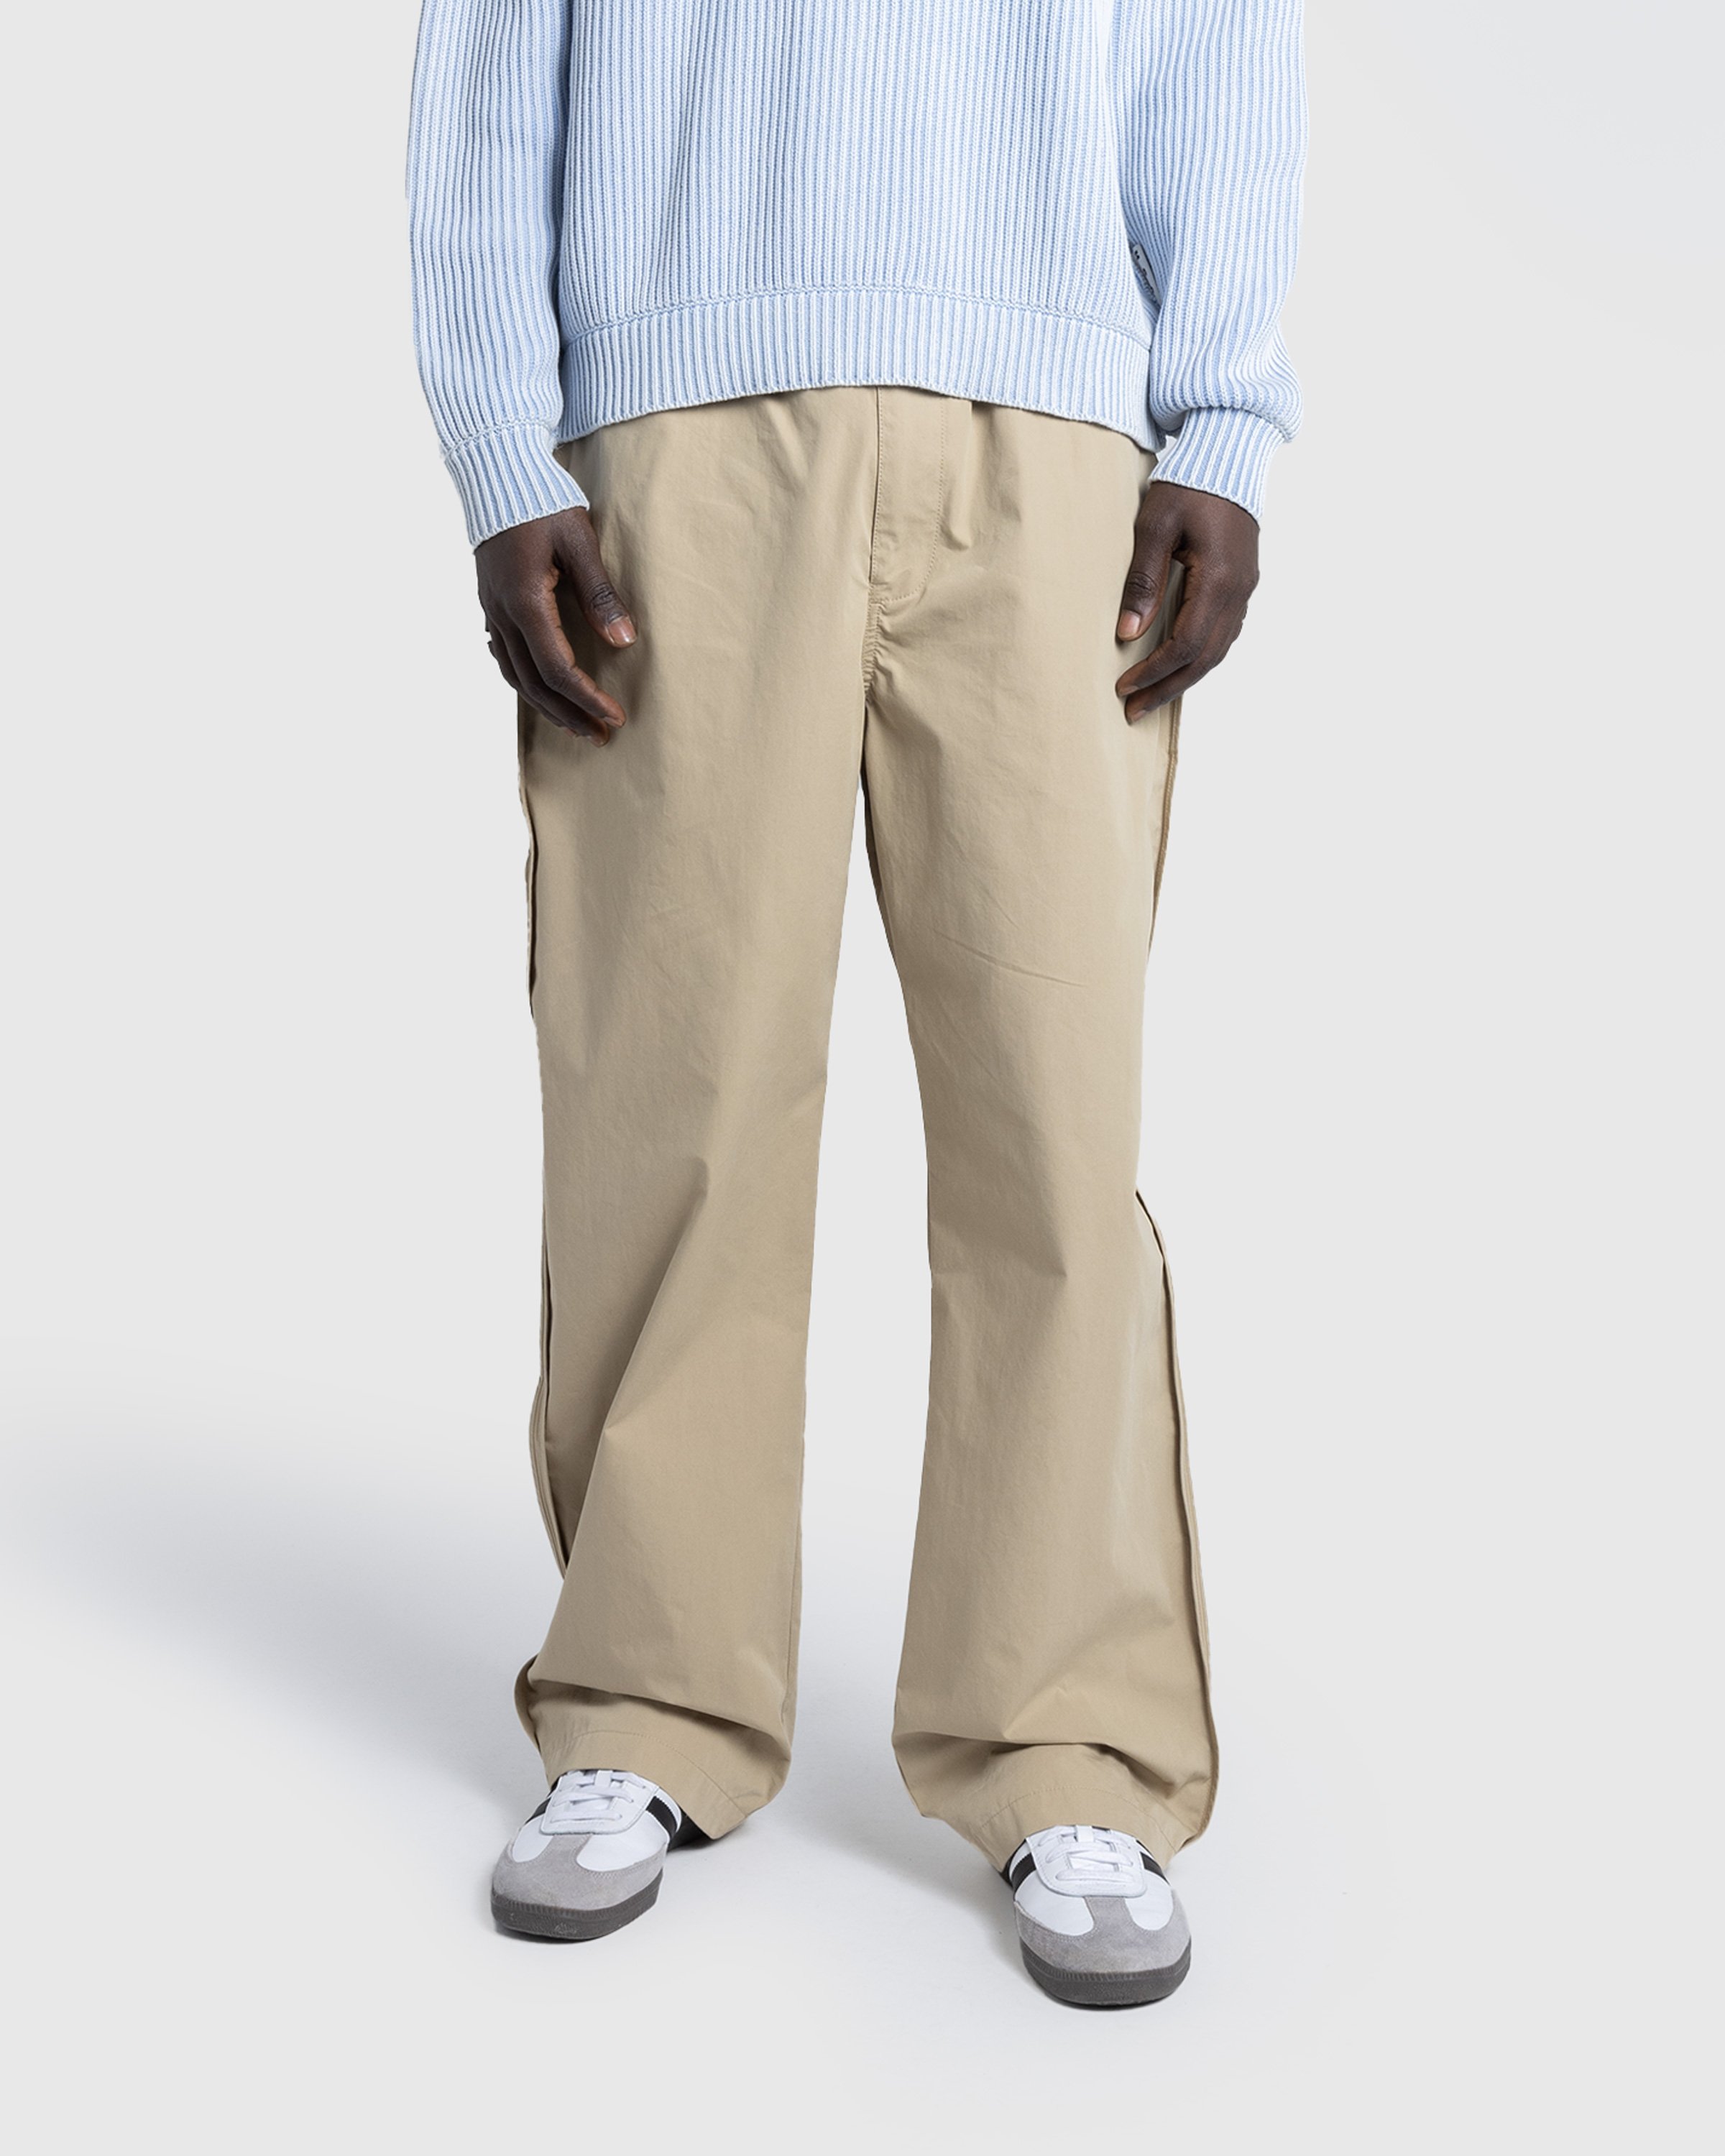 Highsnobiety HS05 – Brushed Reverse Piping Trouser Beige | Highsnobiety ...